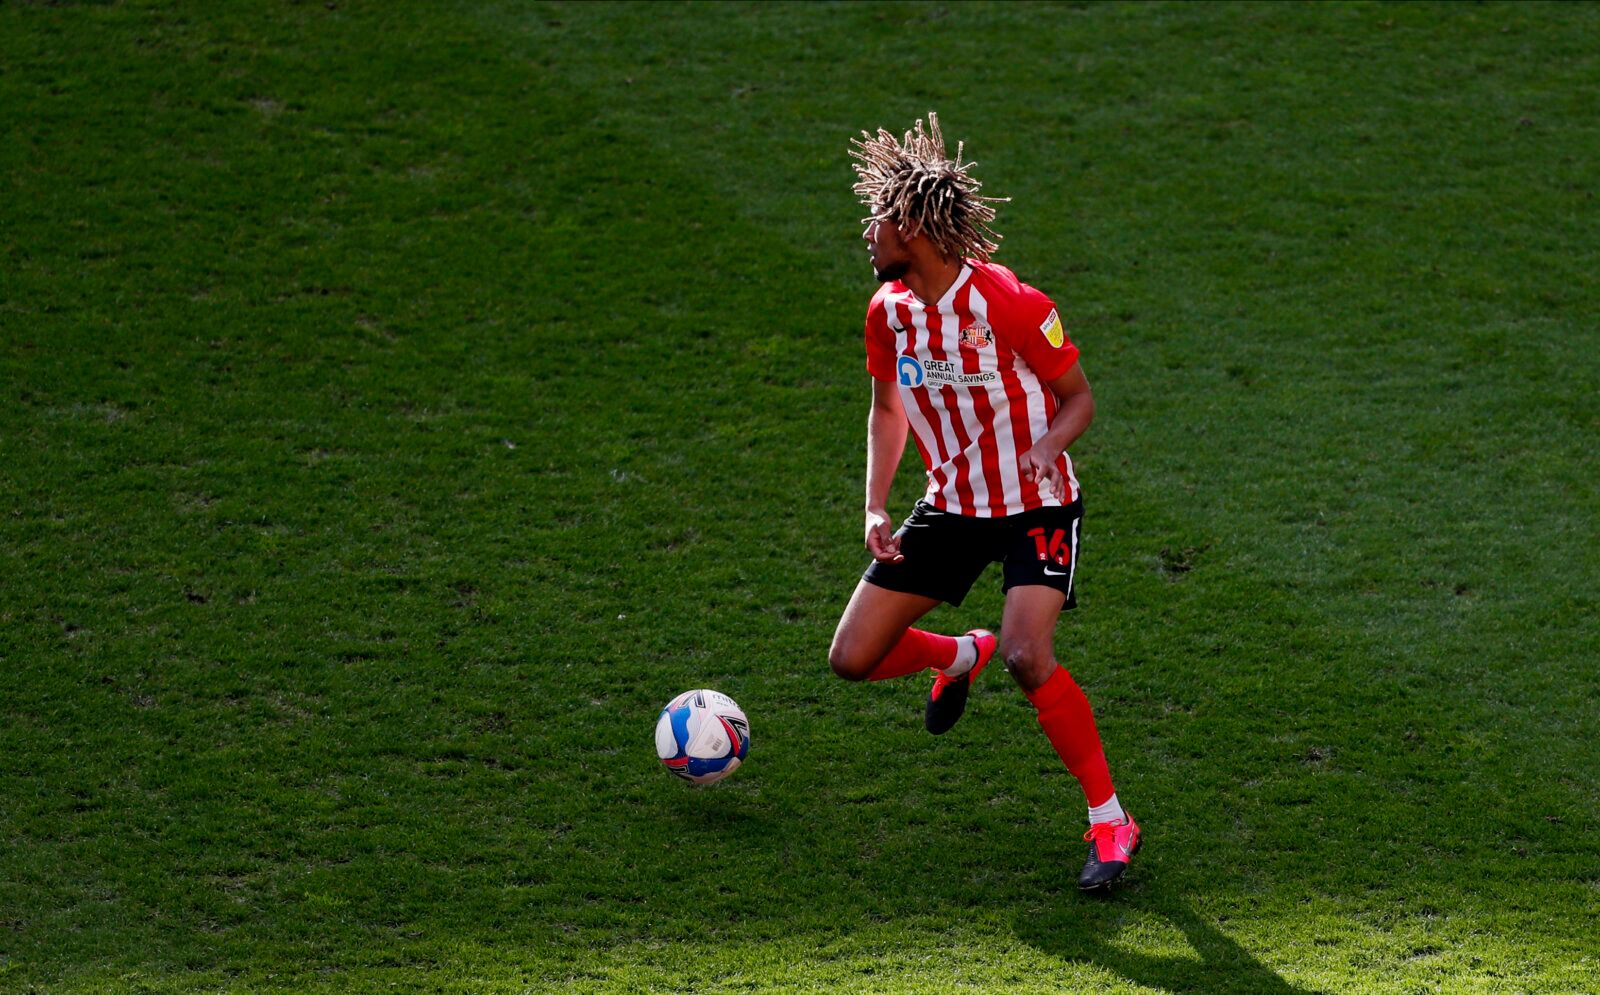 Soccer Football - League One - Sunderland v Lincoln City - Stadium of Light, Sunderland, Britain - March 20, 2021 Sunderland's Dion Sanderson in action Action Images/Lee Smith EDITORIAL USE ONLY. No use with unauthorized audio, video, data, fixture lists, club/league logos or 'live' services. Online in-match use limited to 75 images, no video emulation. No use in betting, games or single club /league/player publications.  Please contact your account representative for further details.